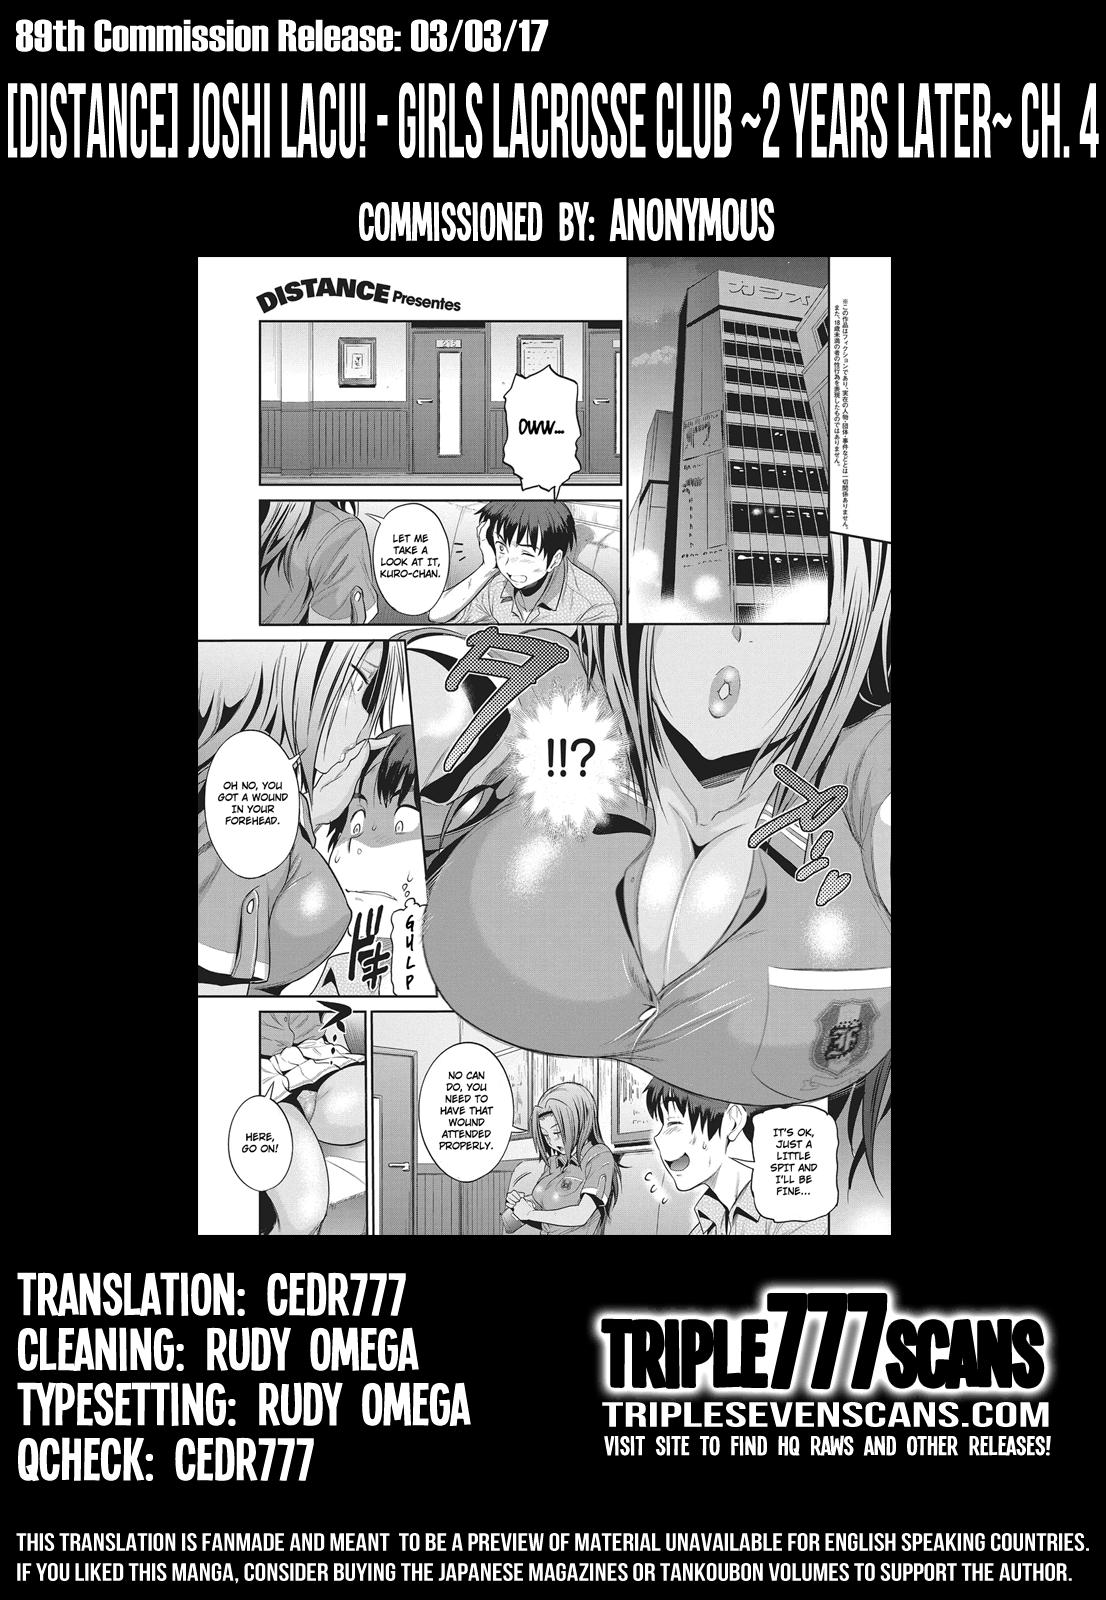 [DISTANCE] Joshi Lacu! - Girls Lacrosse Club ~2 Years Later~ Ch. 4 (COMIC ExE 05) [English] [TripleSevenScans] [Digital] 41